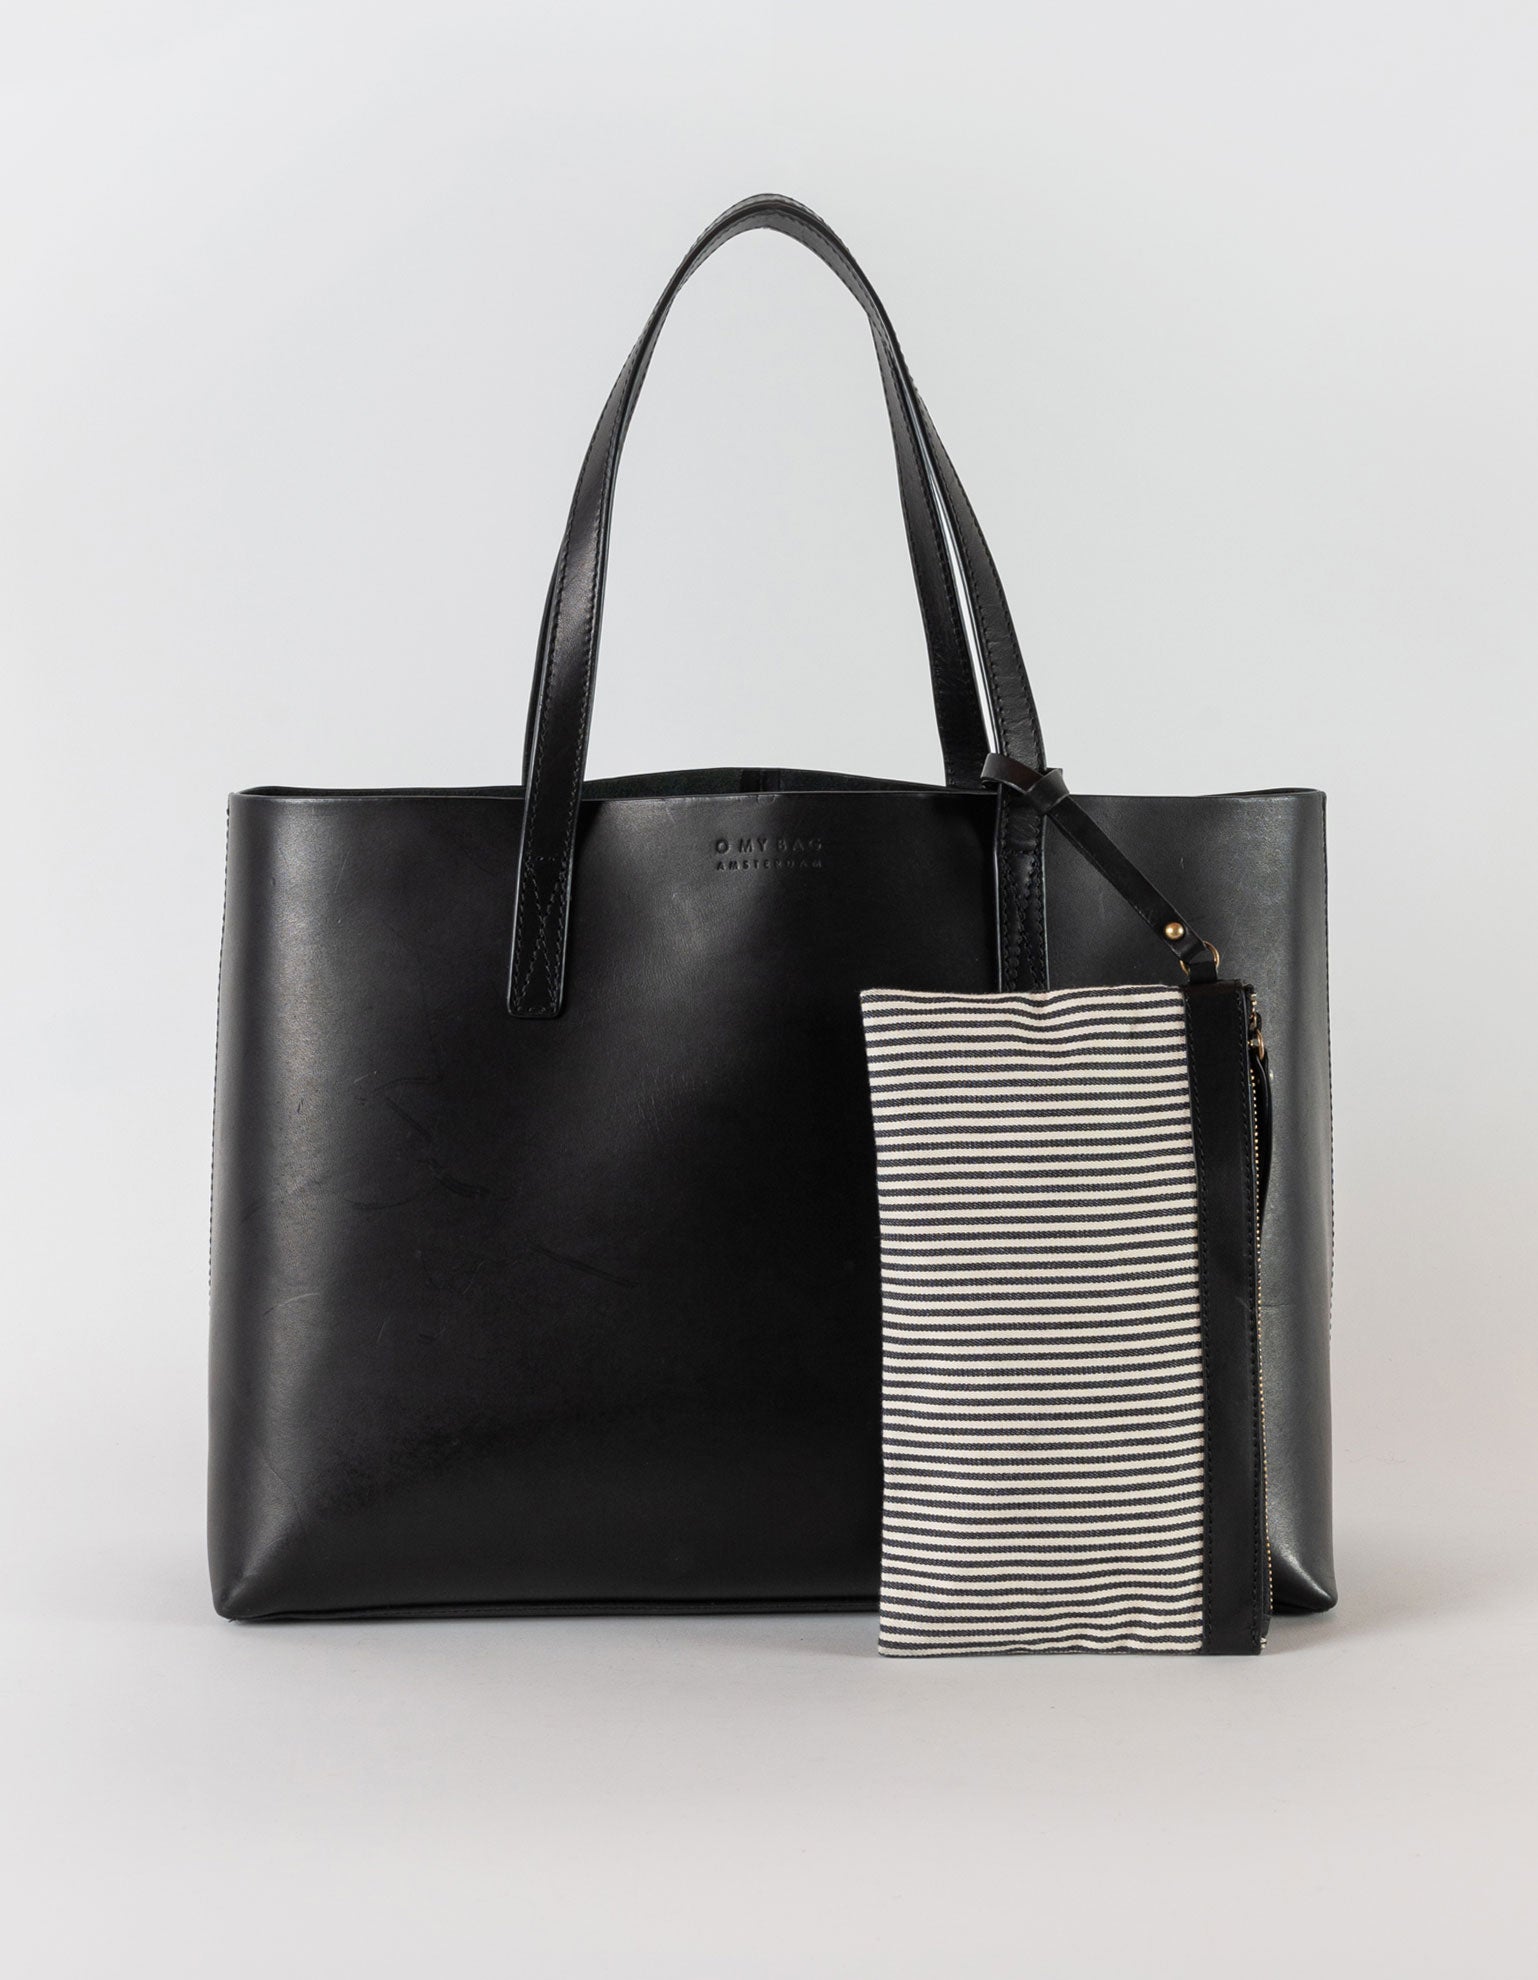 Sam Shopper - Black Classic Leather - Front product image with striped organic cotton pocket.